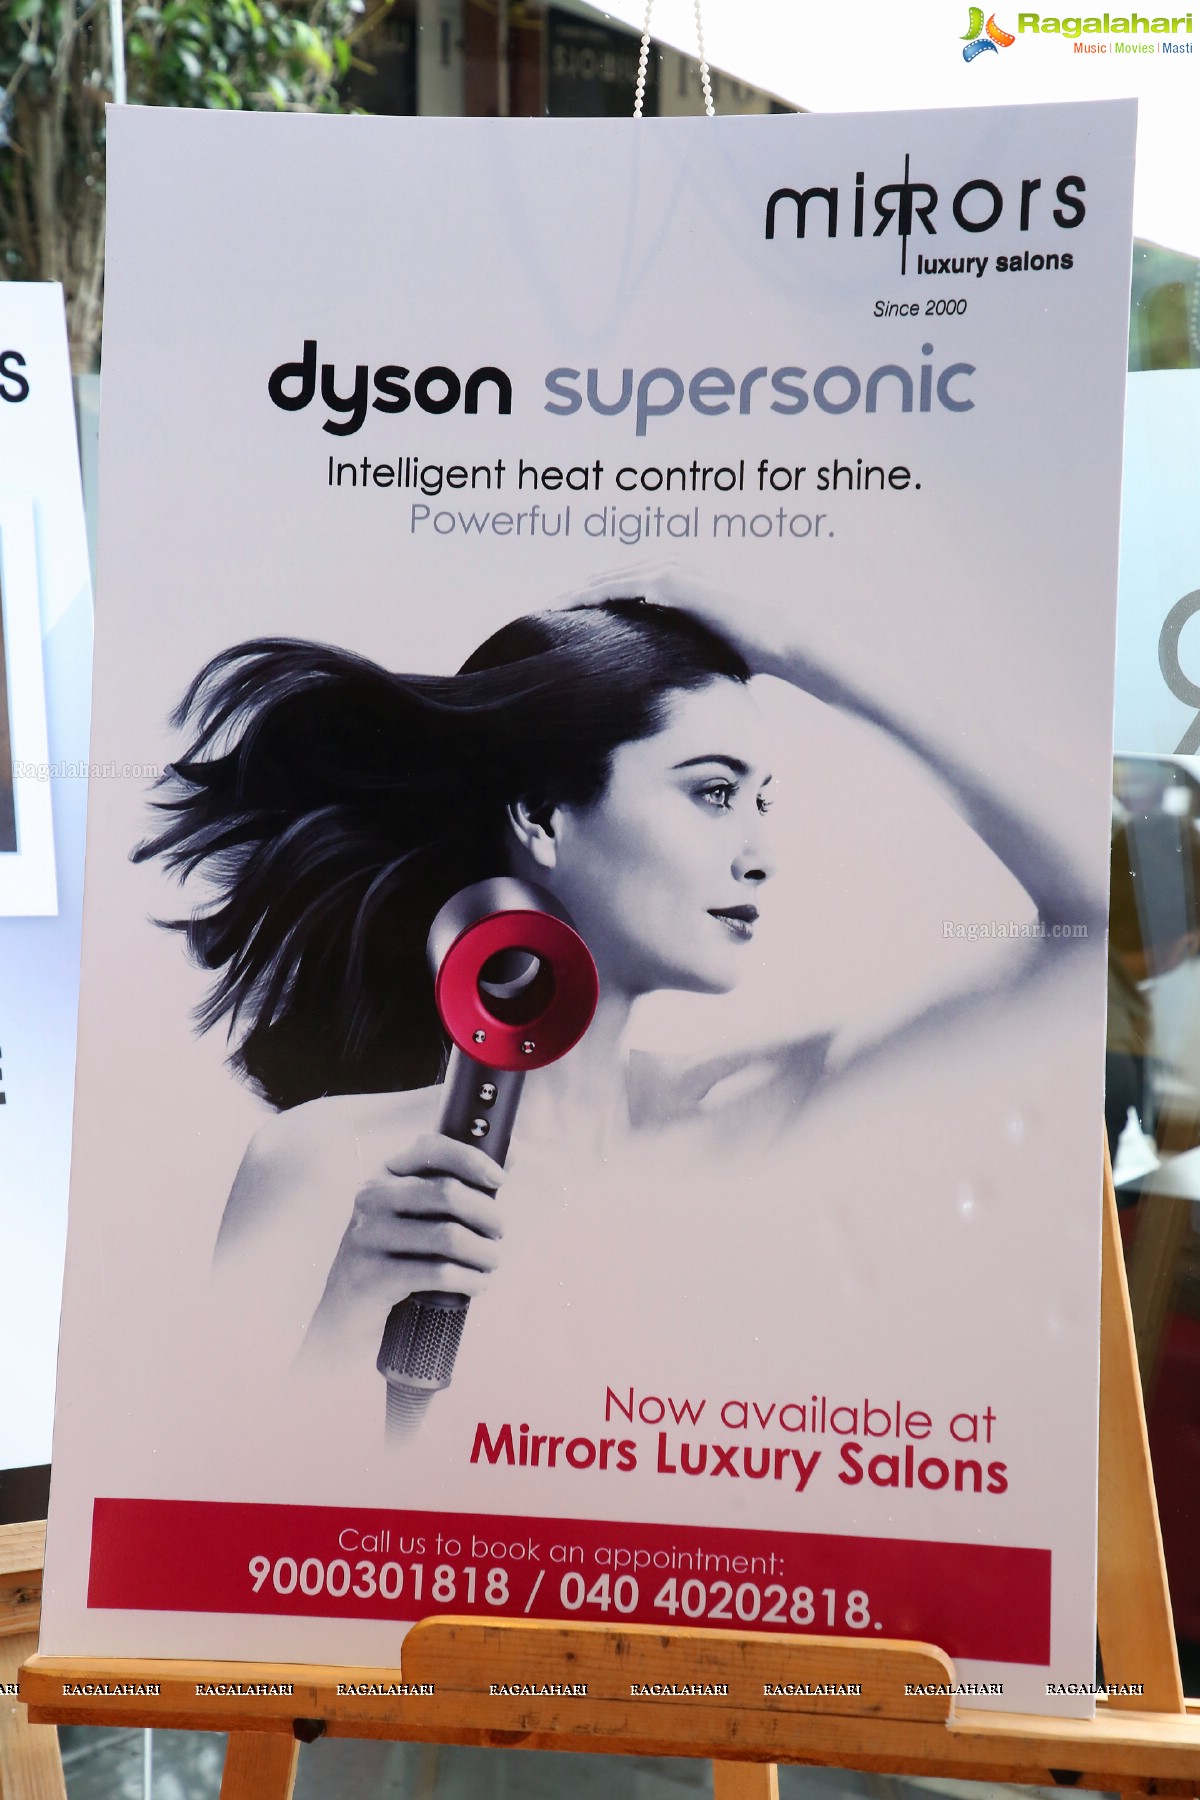 Mirrors Luxury Salons Announce its Association with Dyson